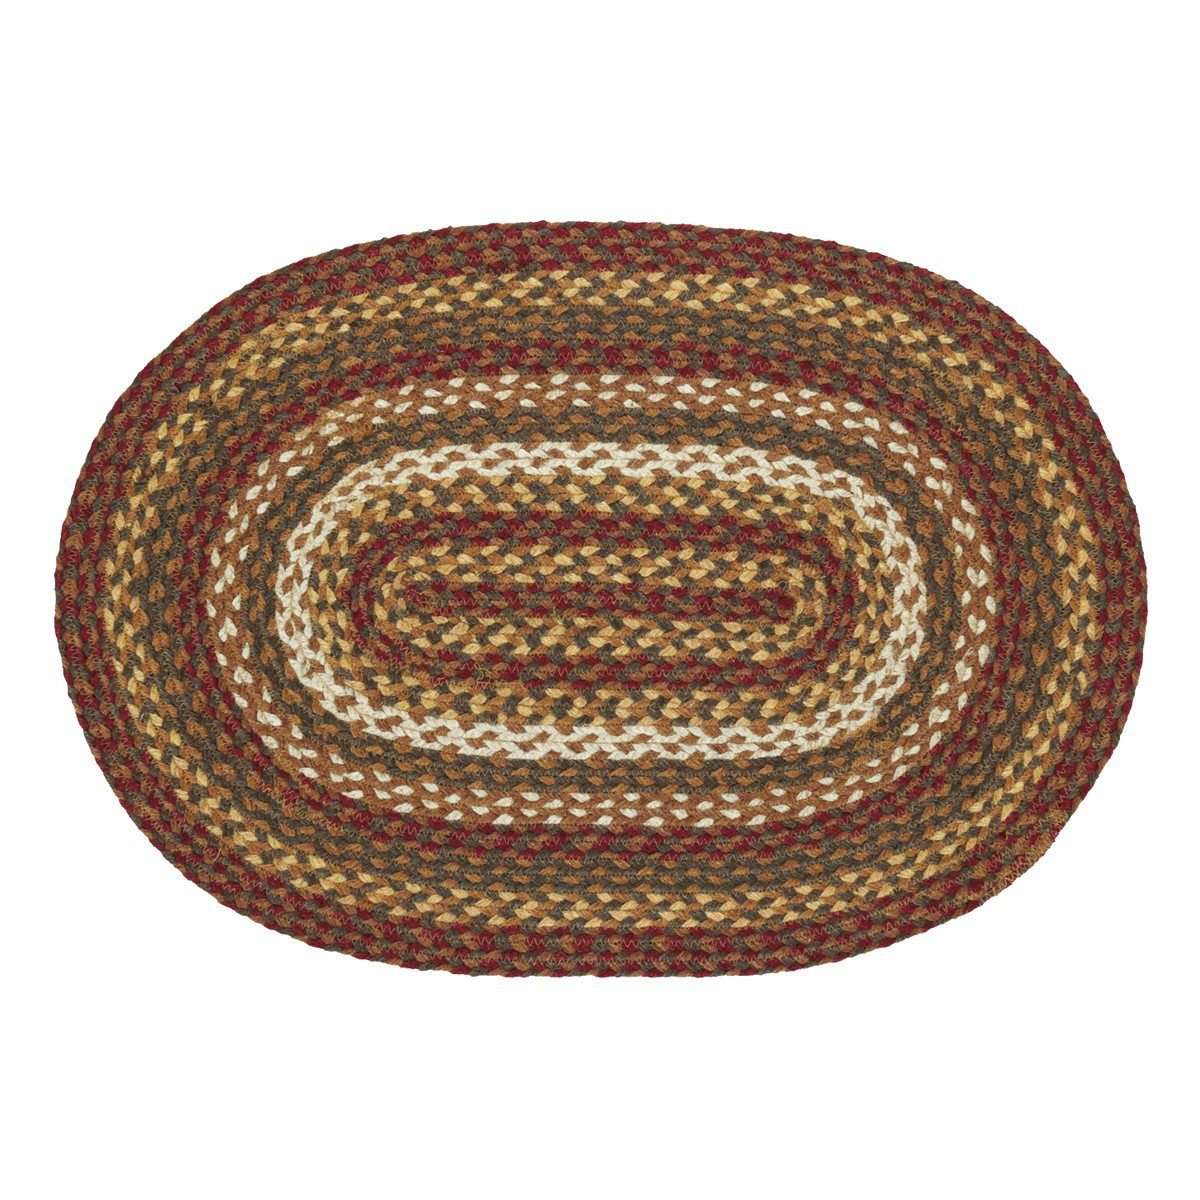 Tea Cabin Jute Braided Rugs Oval Rugs VHC Brands 24" x 36" 